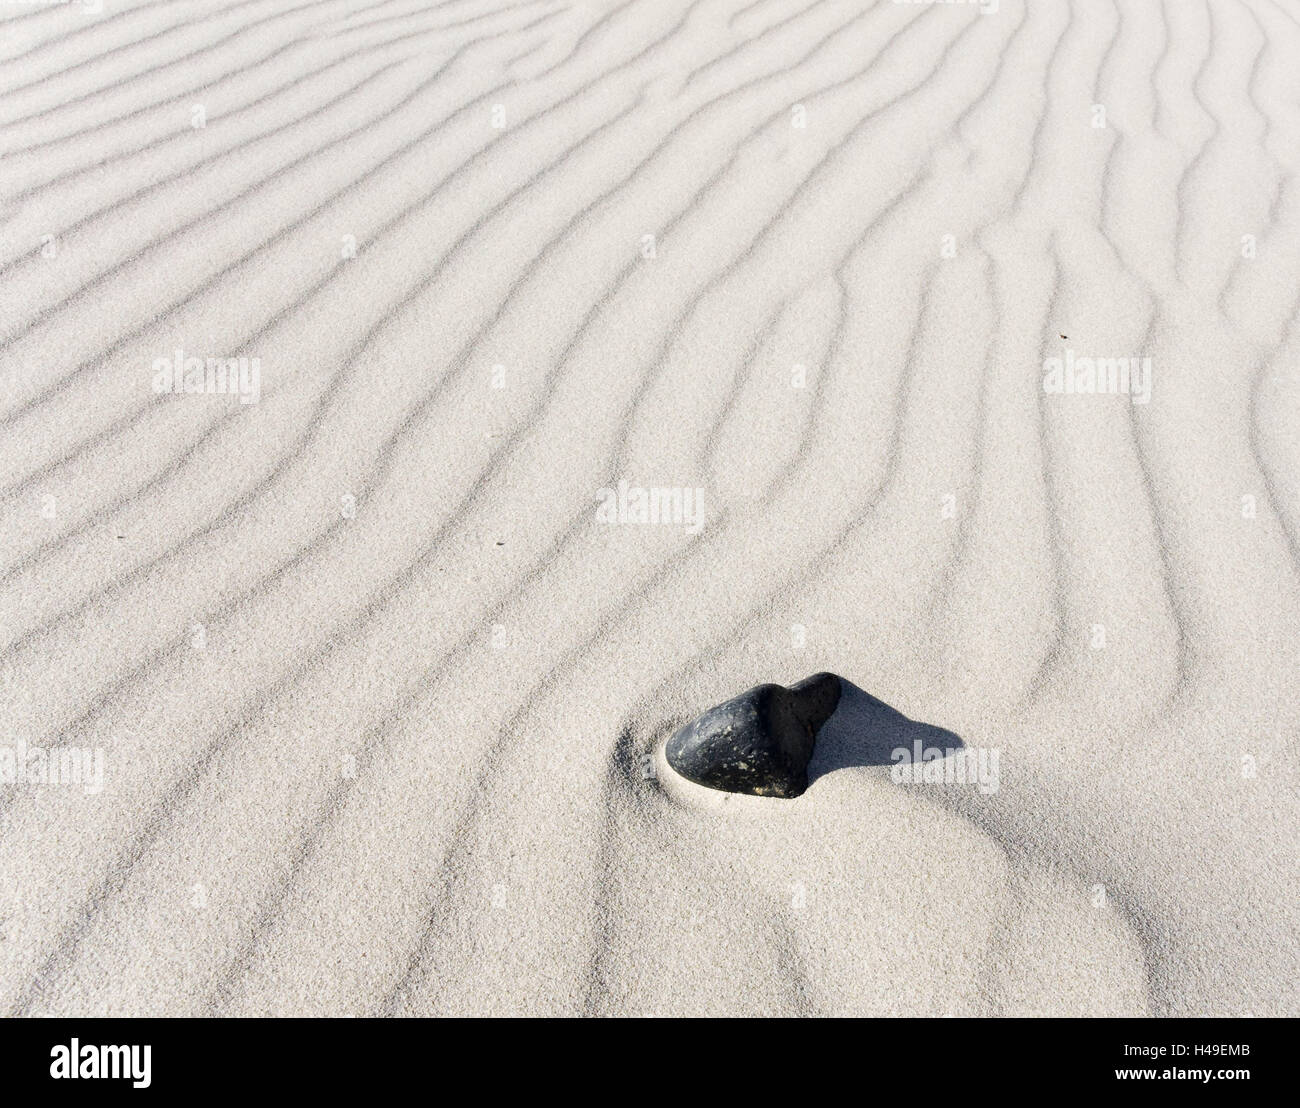 Sand, white, wavy lines, stone, black, beach, sandy beach, desert, sand desert, sand dune, dune, ripple marks, wave pattern, patterns, lines, flow, wind flow, wave furrows, structure, wind, sticking out, interruption, malfunction, Still Life, foreign bodi Stock Photo